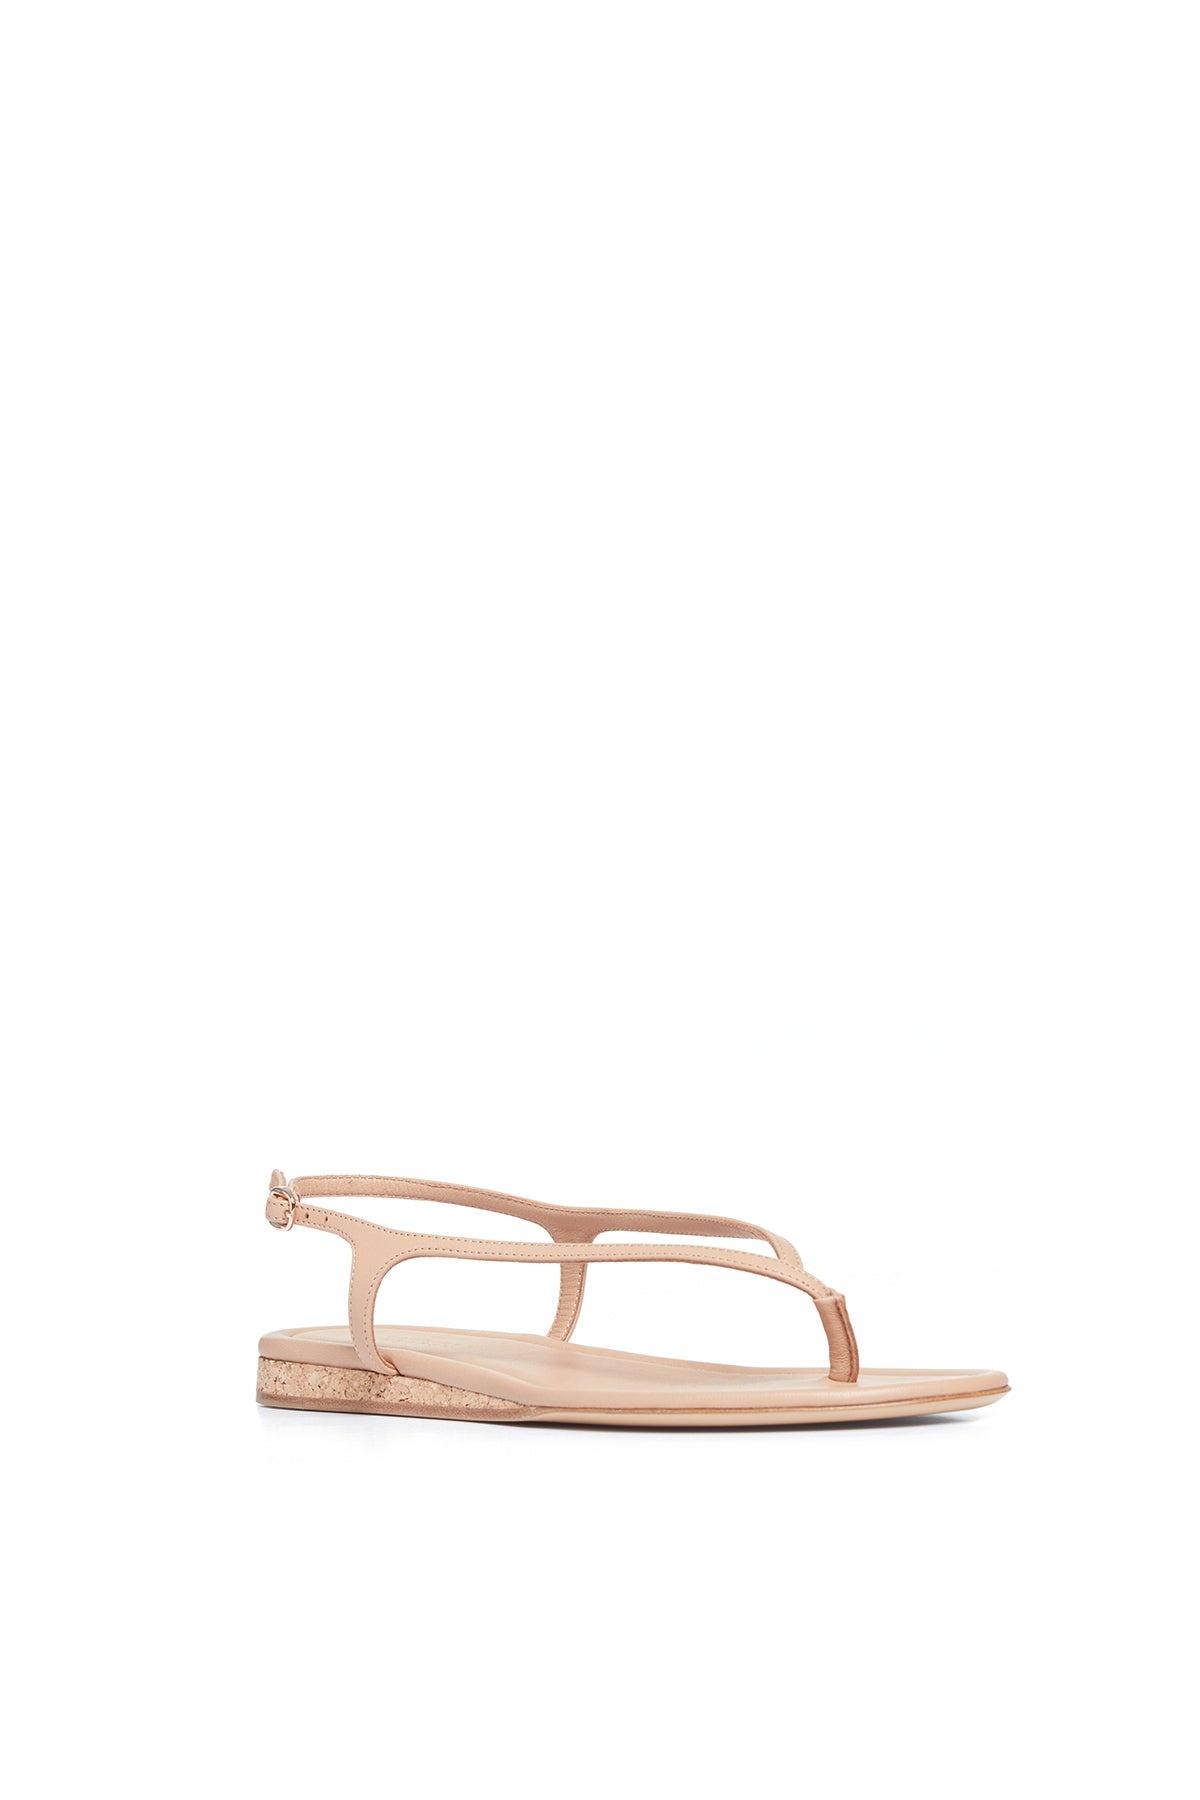 Gia Sandals in Dark Camel Leather - 2